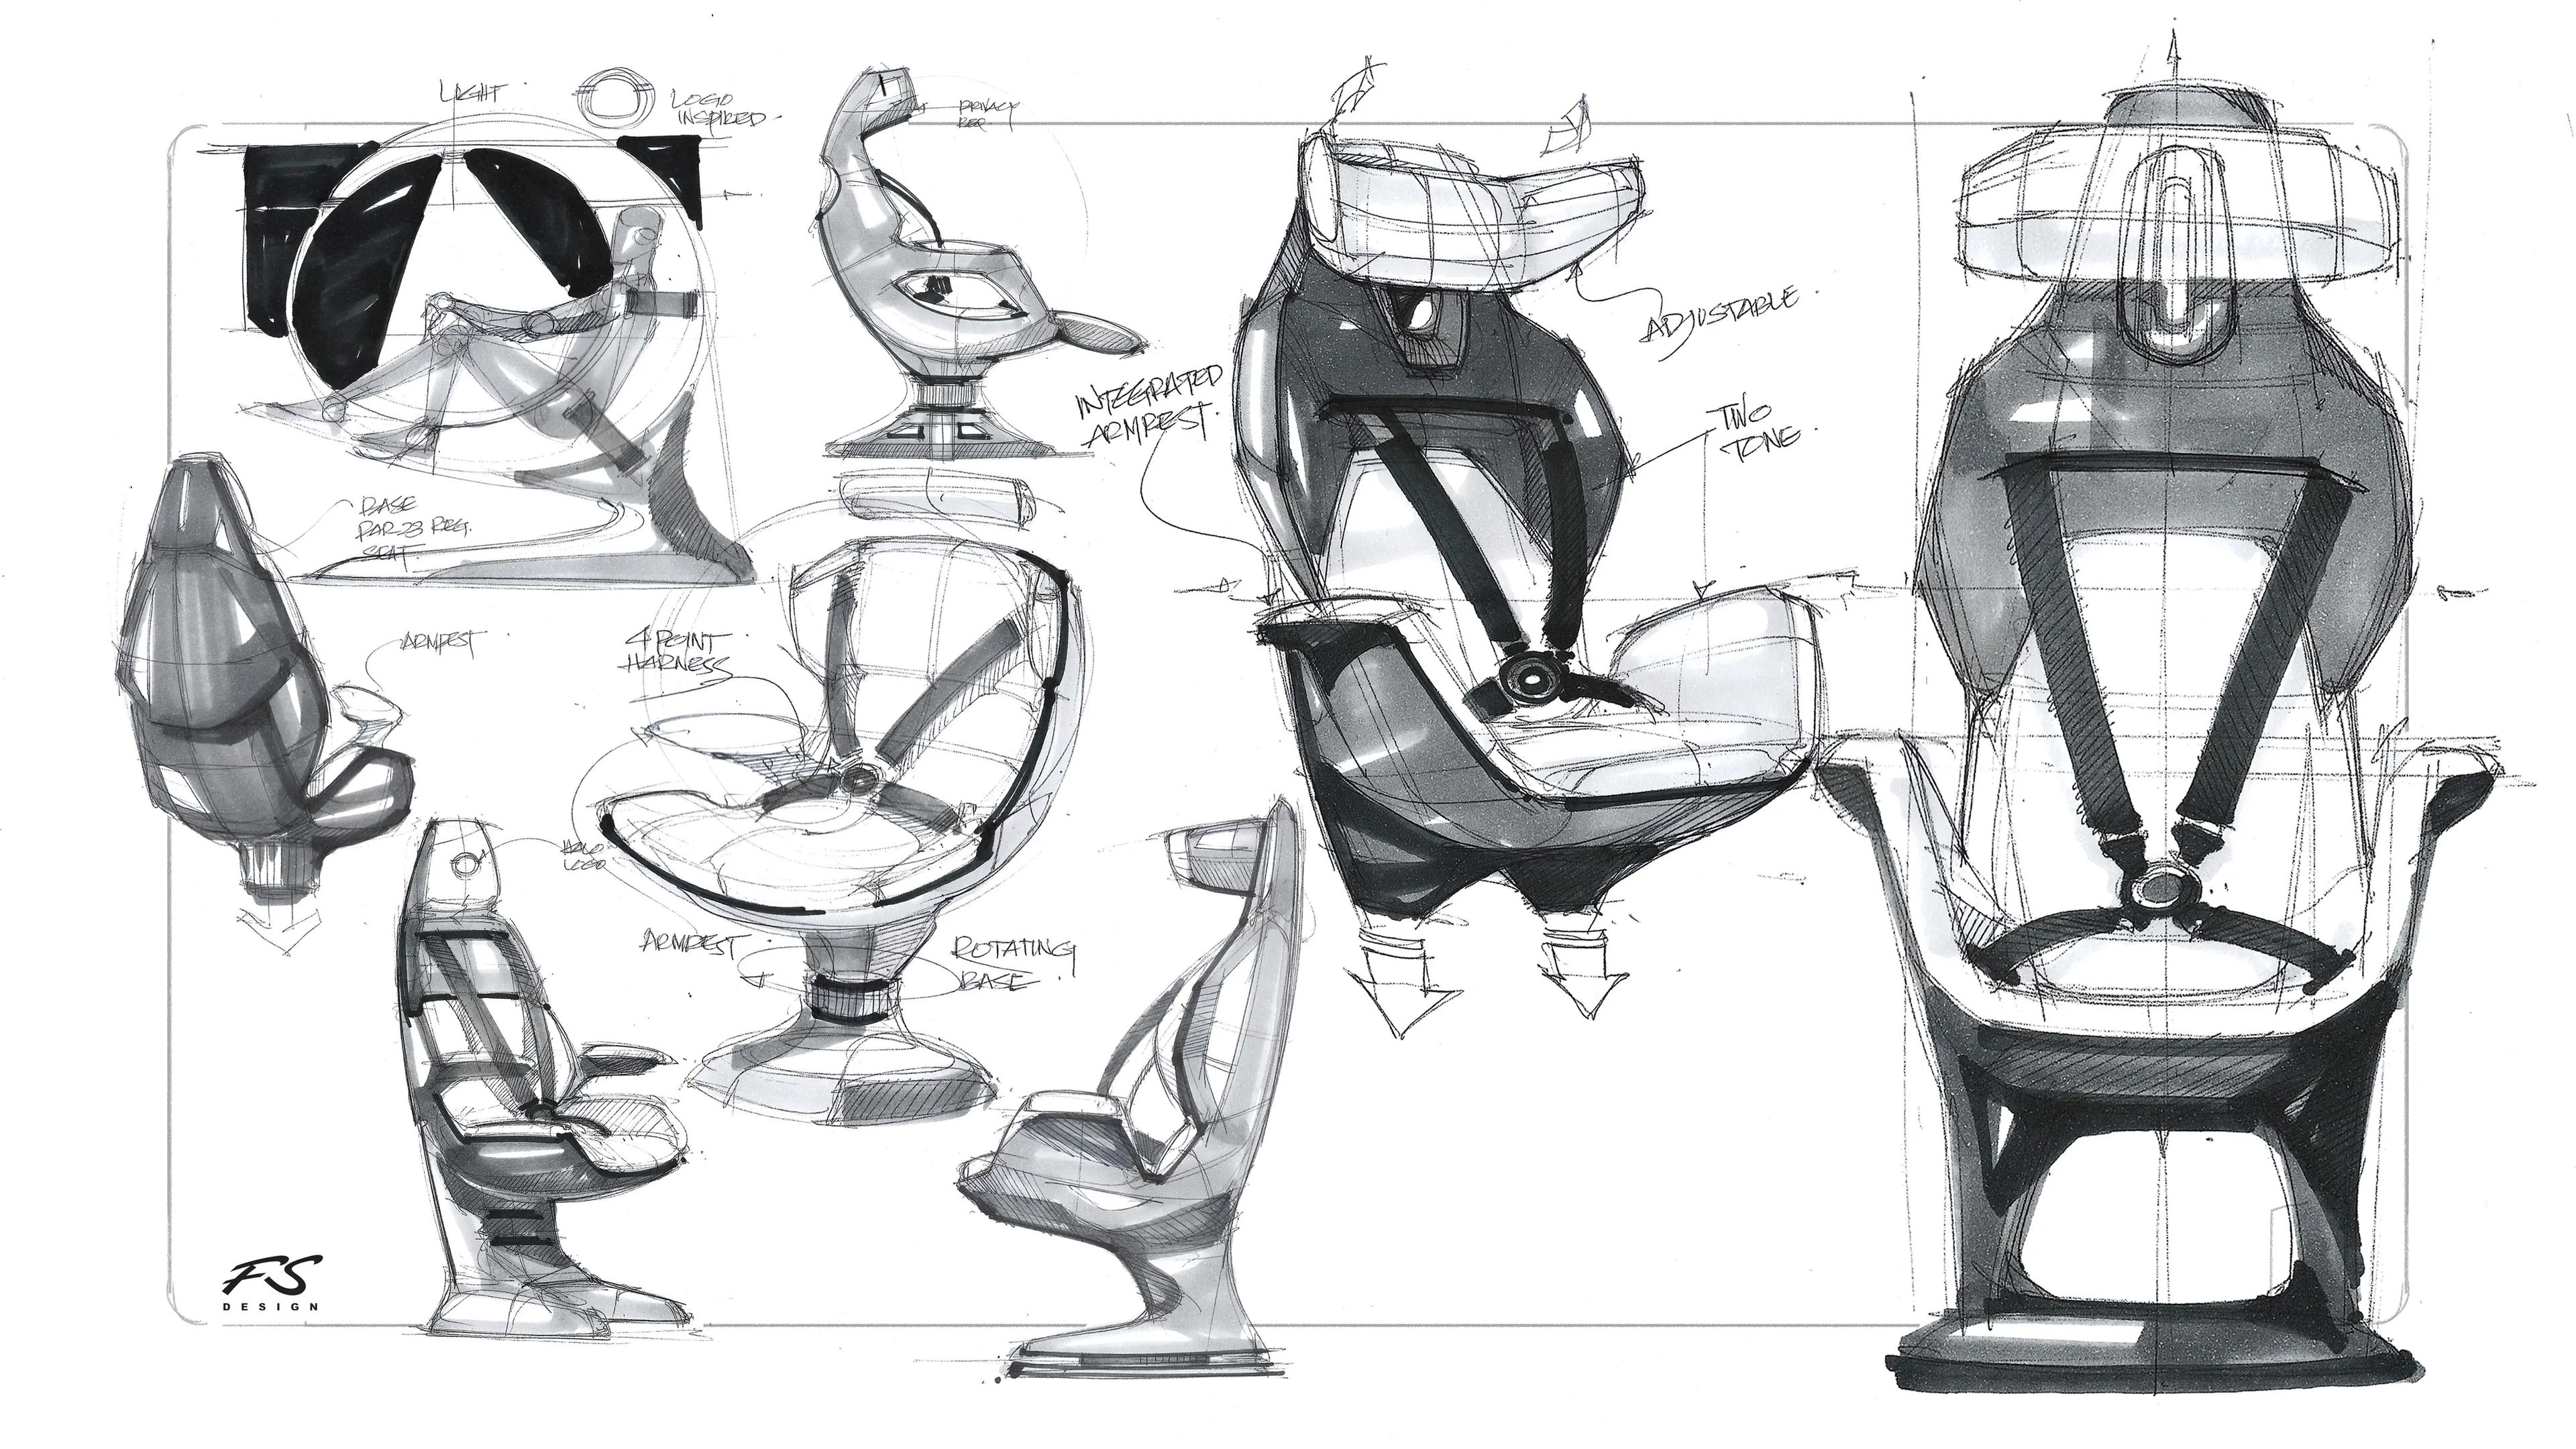 Sketches of the seat design for the Halo Space capsule